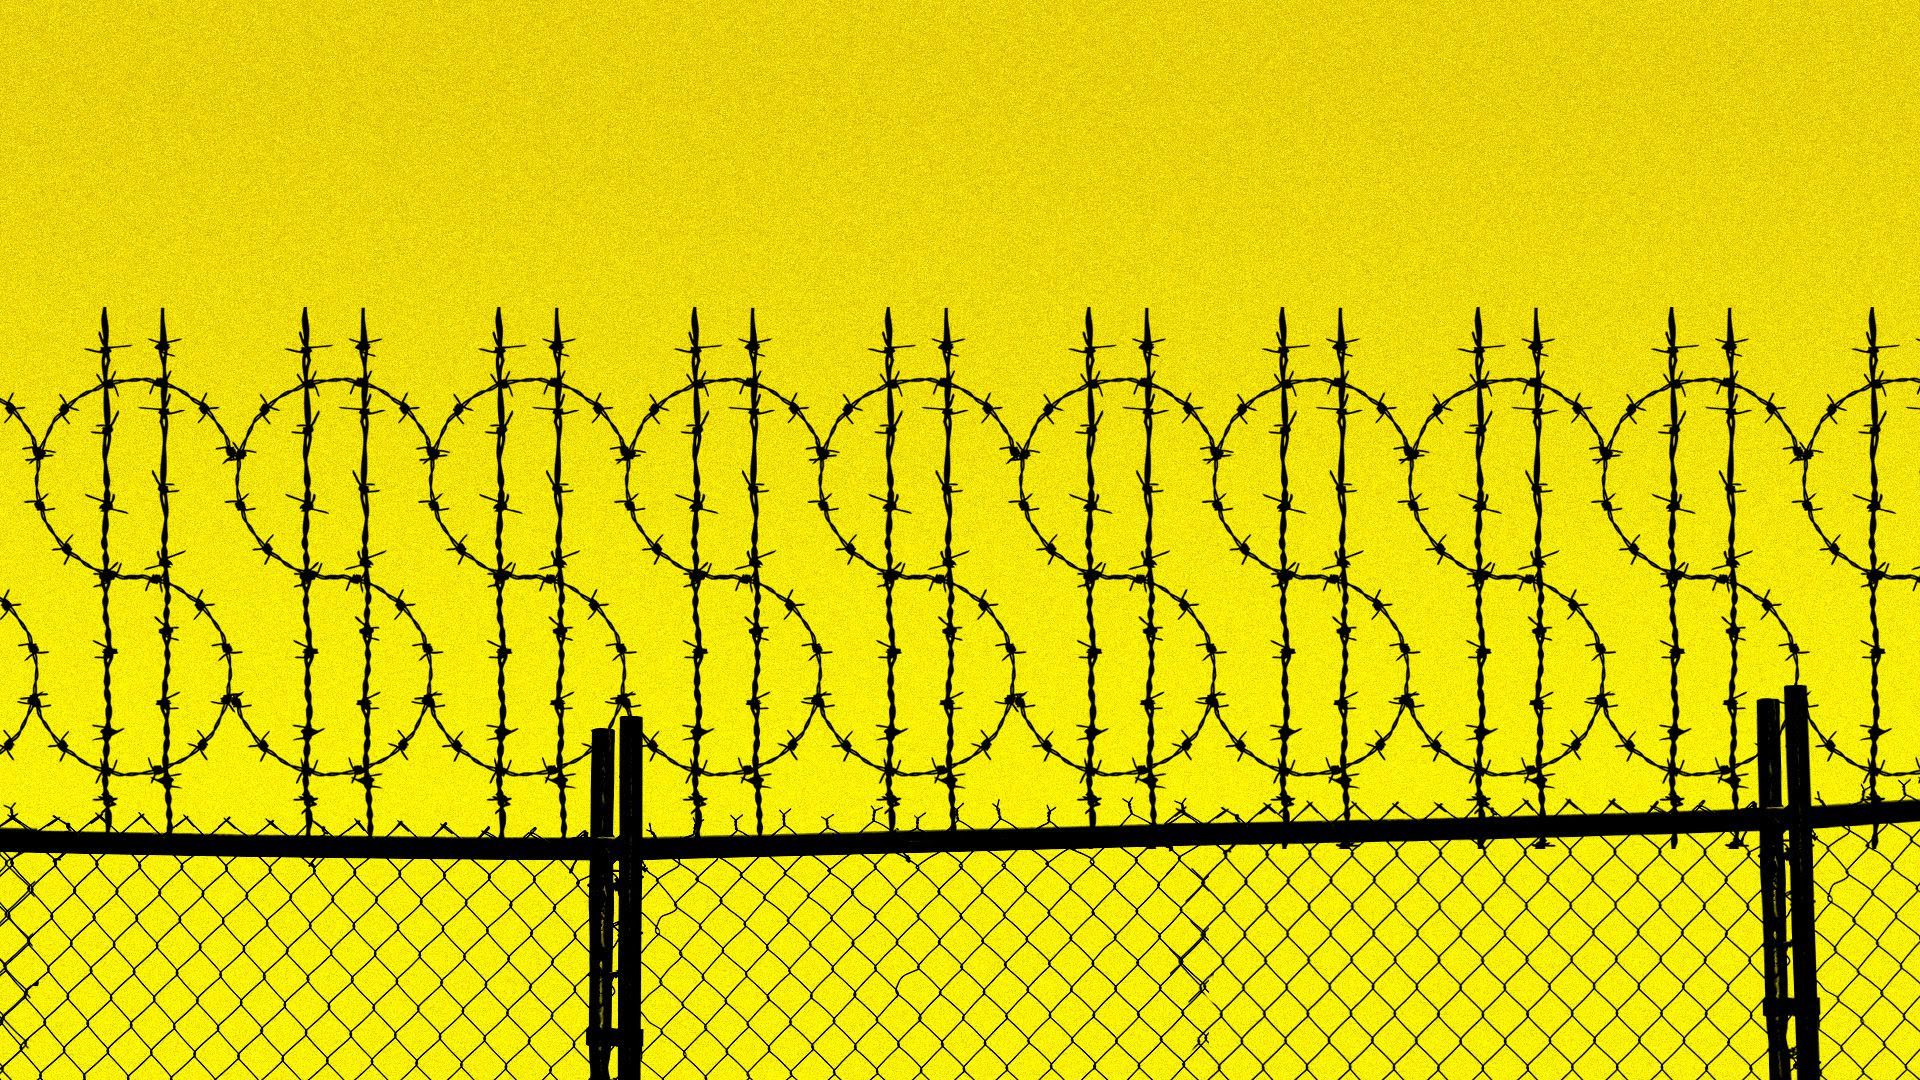 A prison fence with the fence shaped into dollar signs.